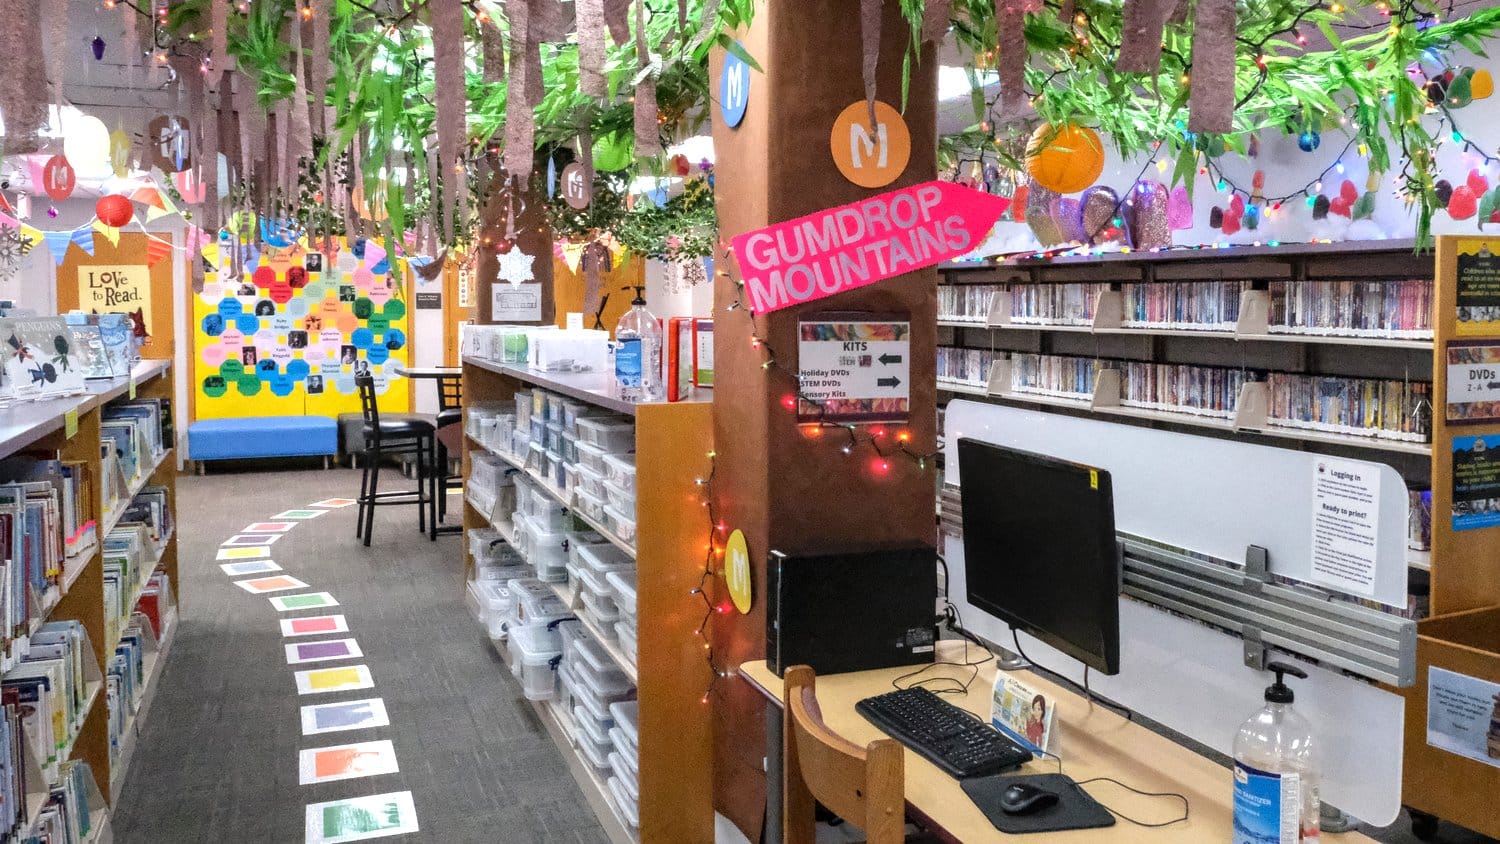 Youth section has its own computer access, DVDs, STEM kits, and sensory kits.